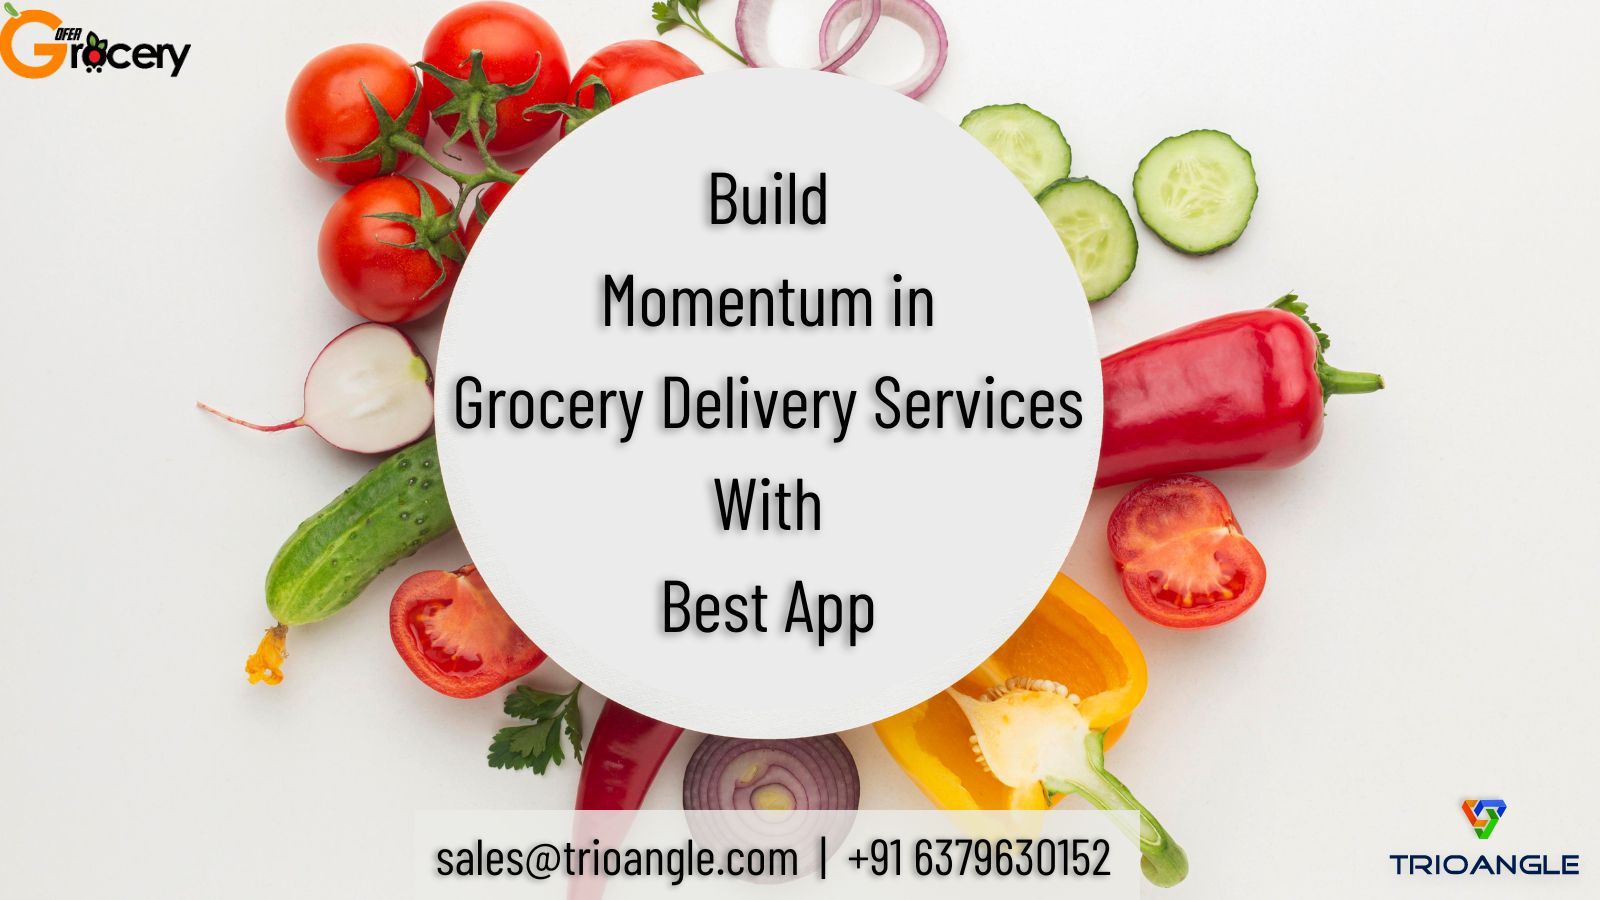 Build Momentum in Grocery Delivery Services With Best App.jpg